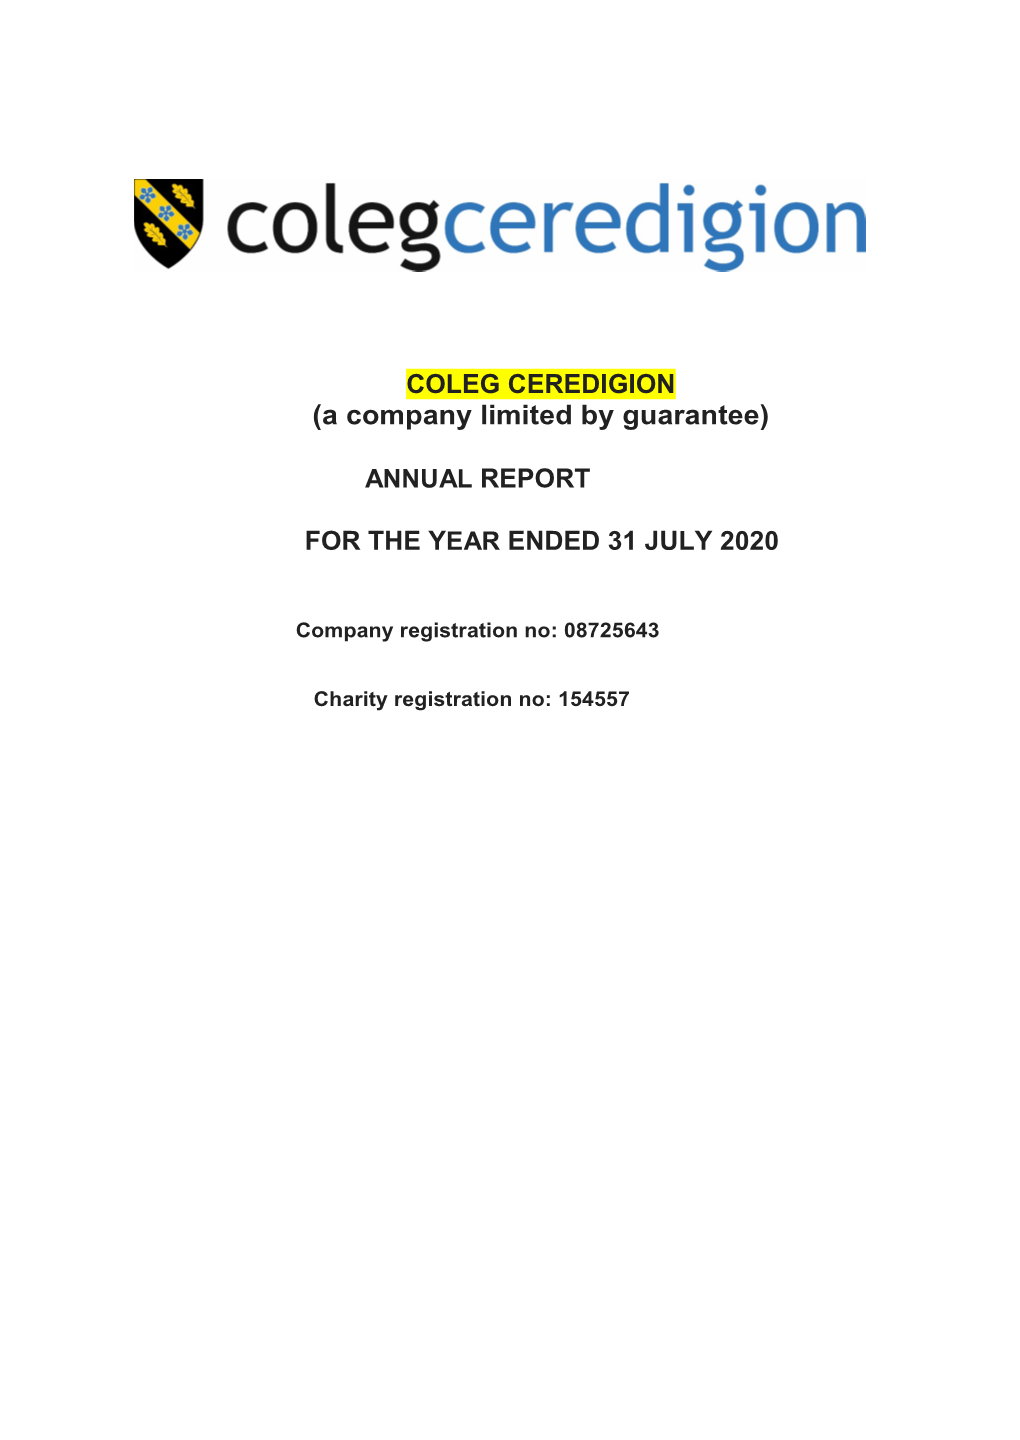 COLEG CEREDIGION (A Company Limited by Guarantee) for THE